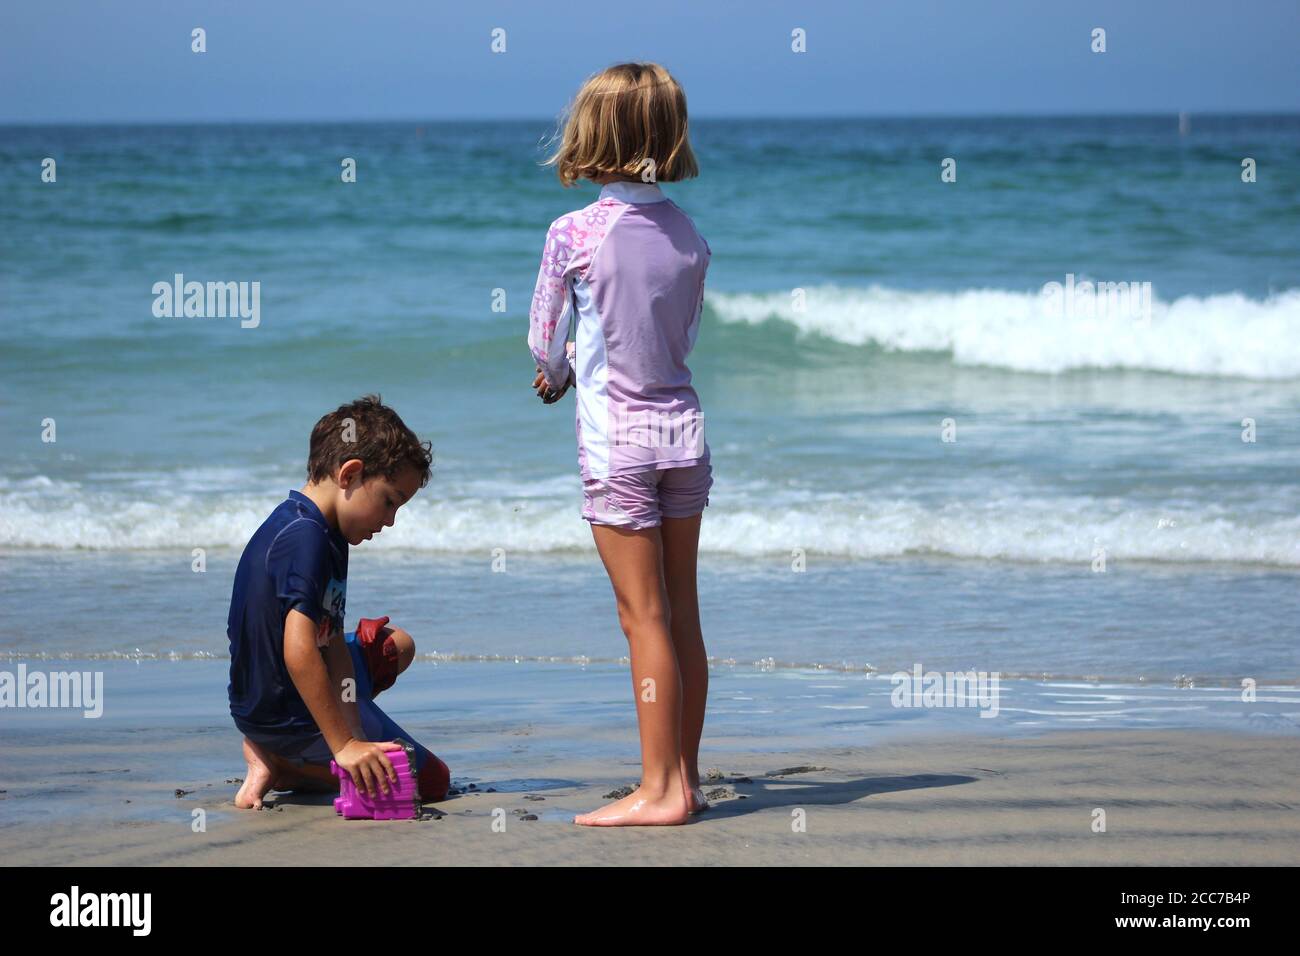 Two young children (siblings) at the beach Stock Photo